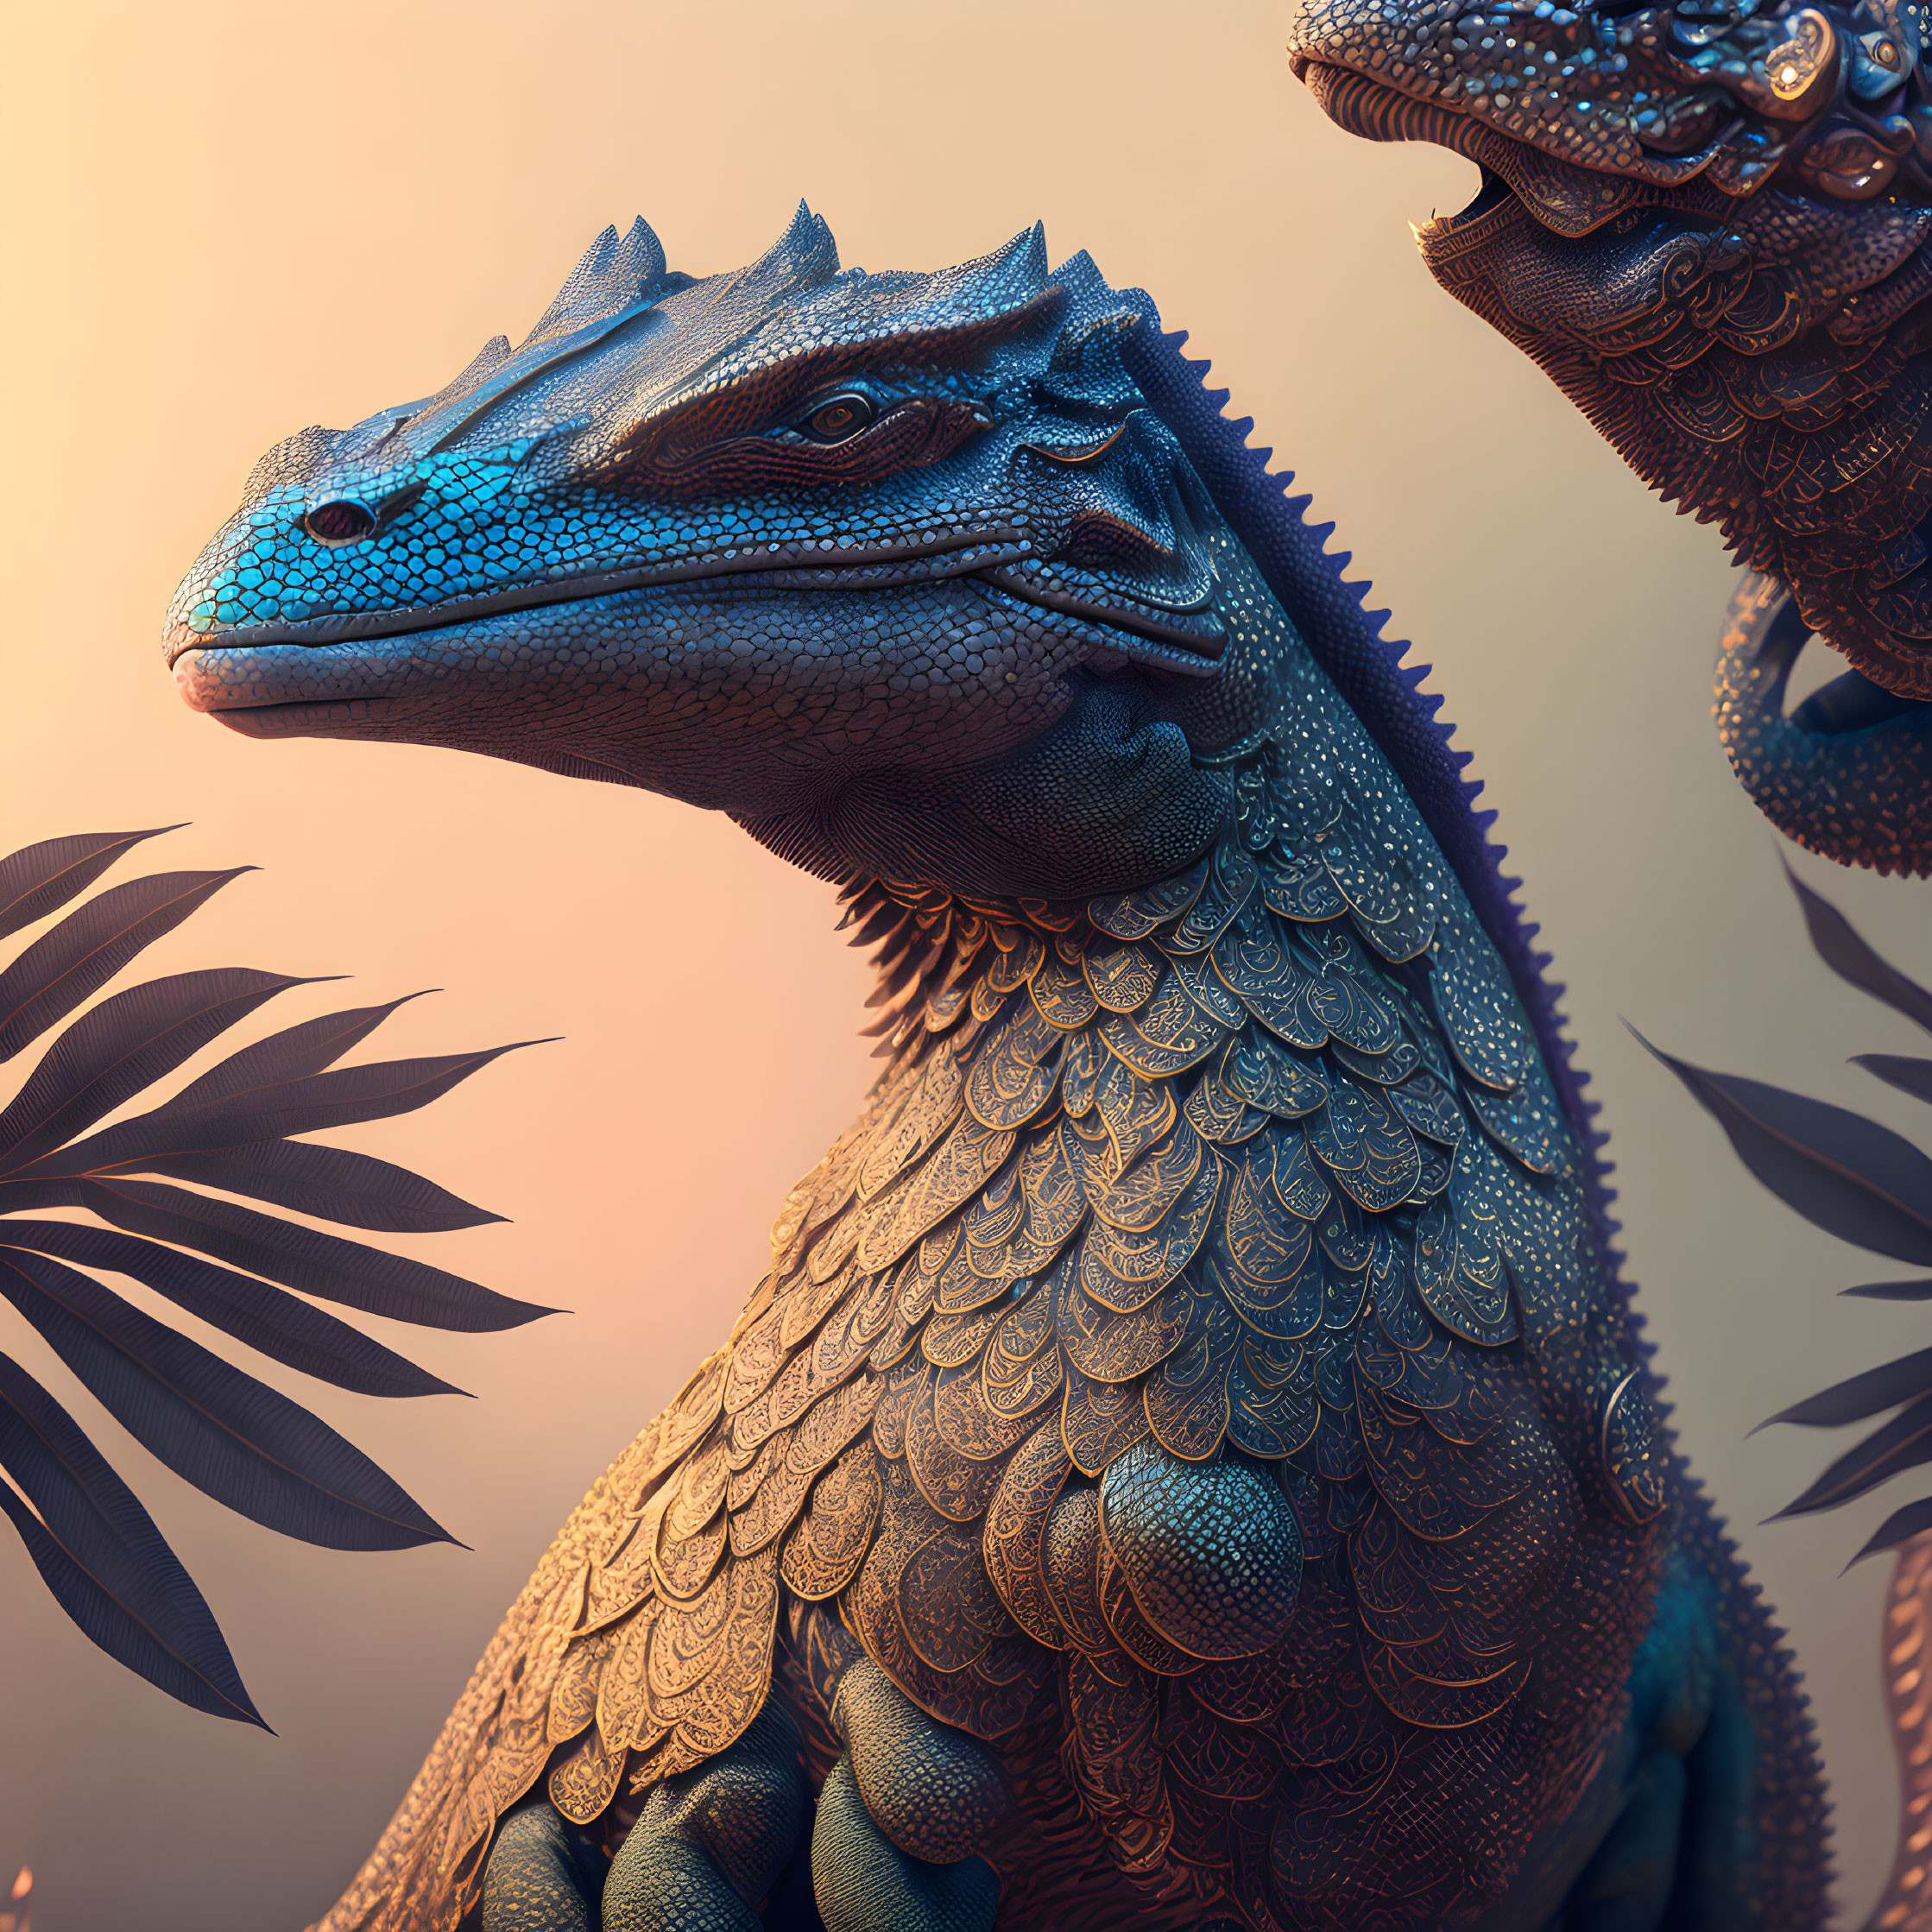 Detailed CGI image of majestic blue dragon with intricate scales and piercing eyes against warm backdrop.